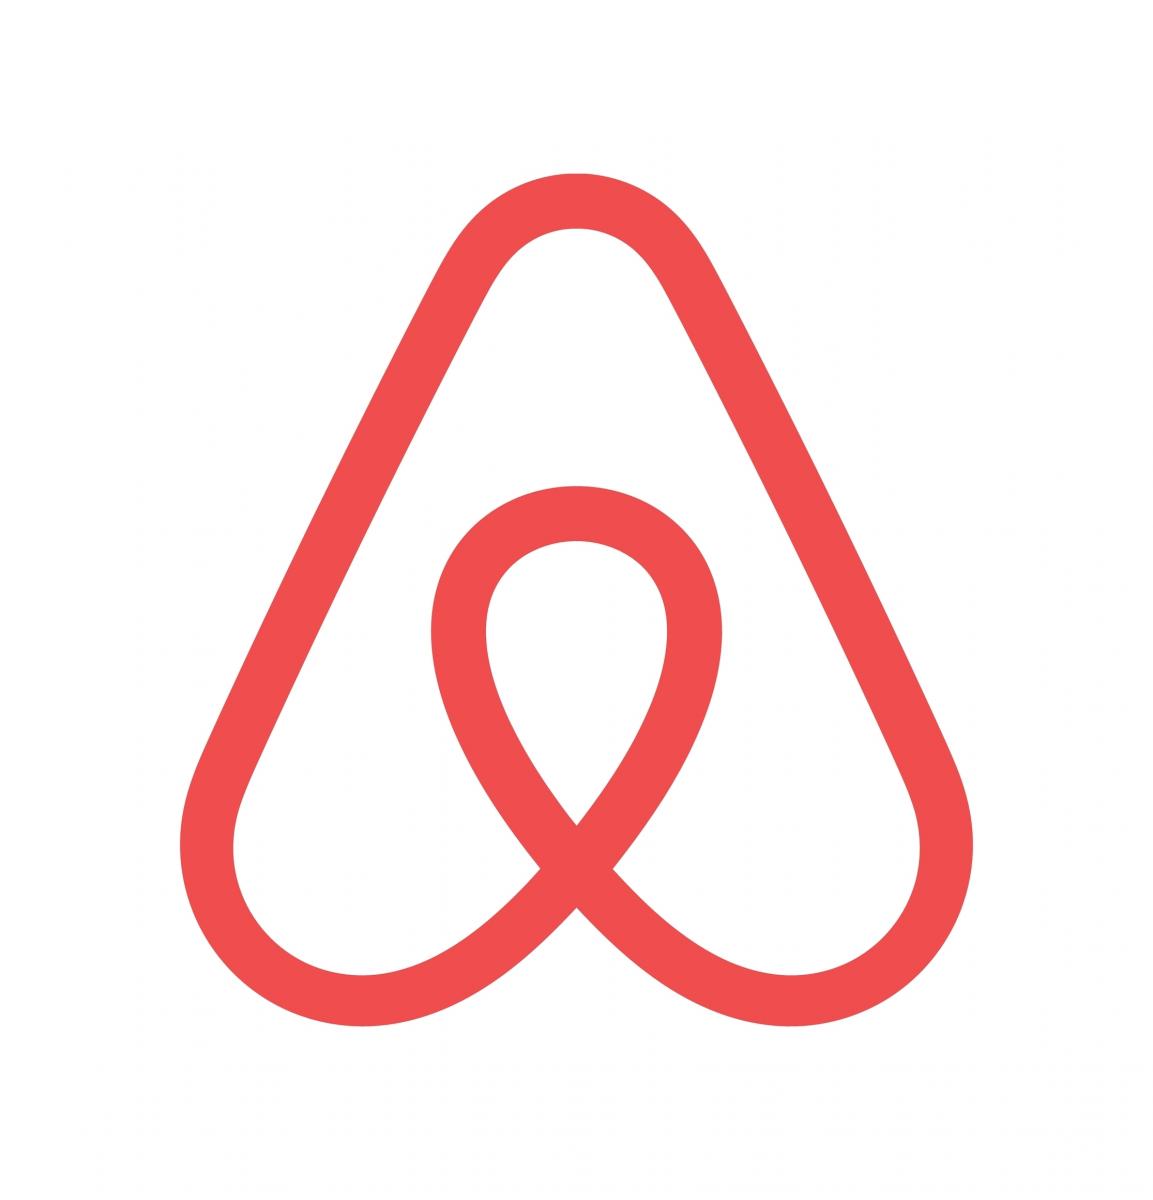 Hate campaign launched against Airbnb